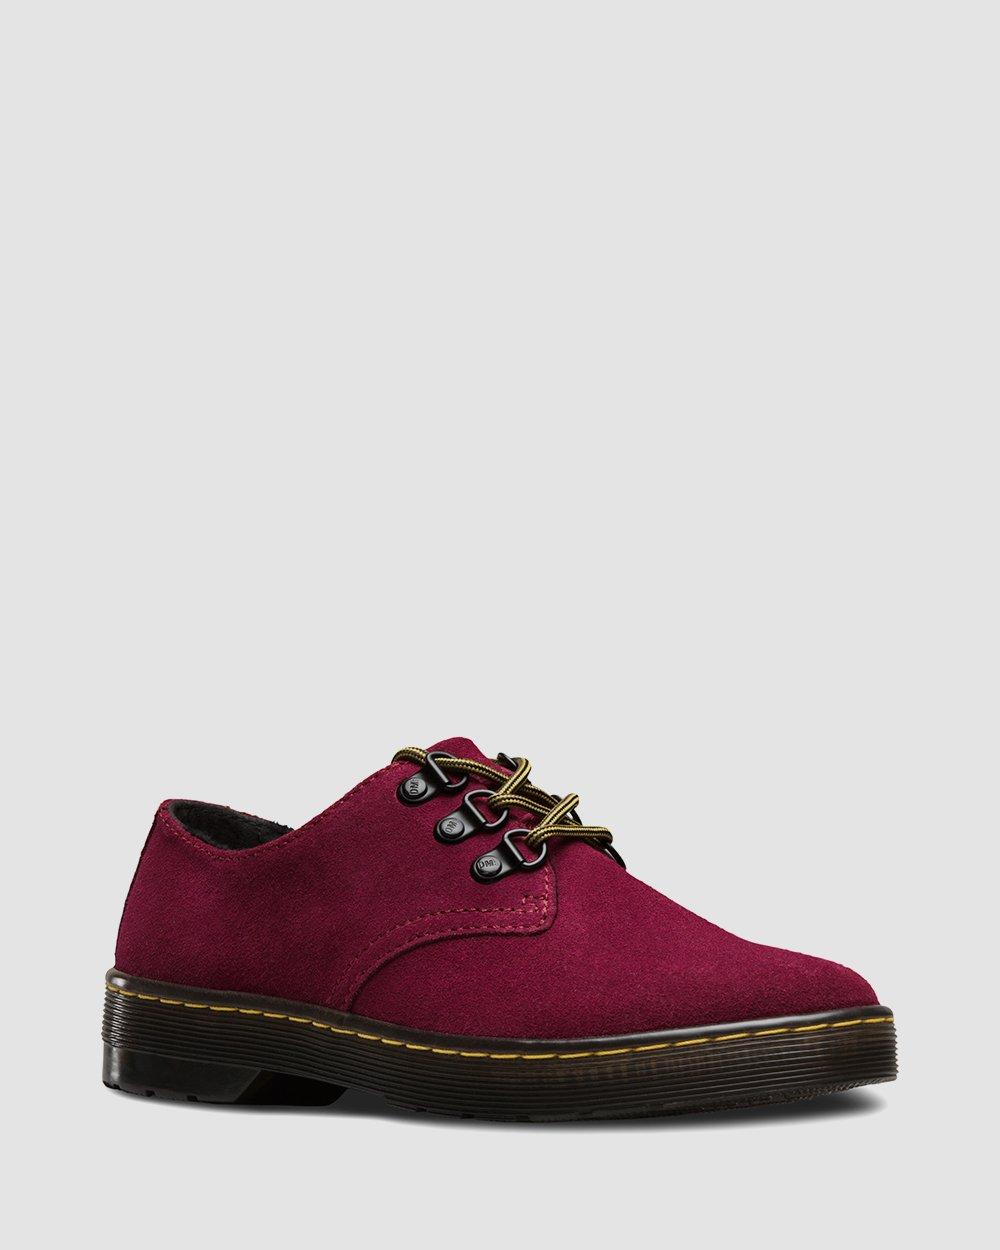 Martens Womenss Gizelle Twill Canvas Red Derbys Dr 